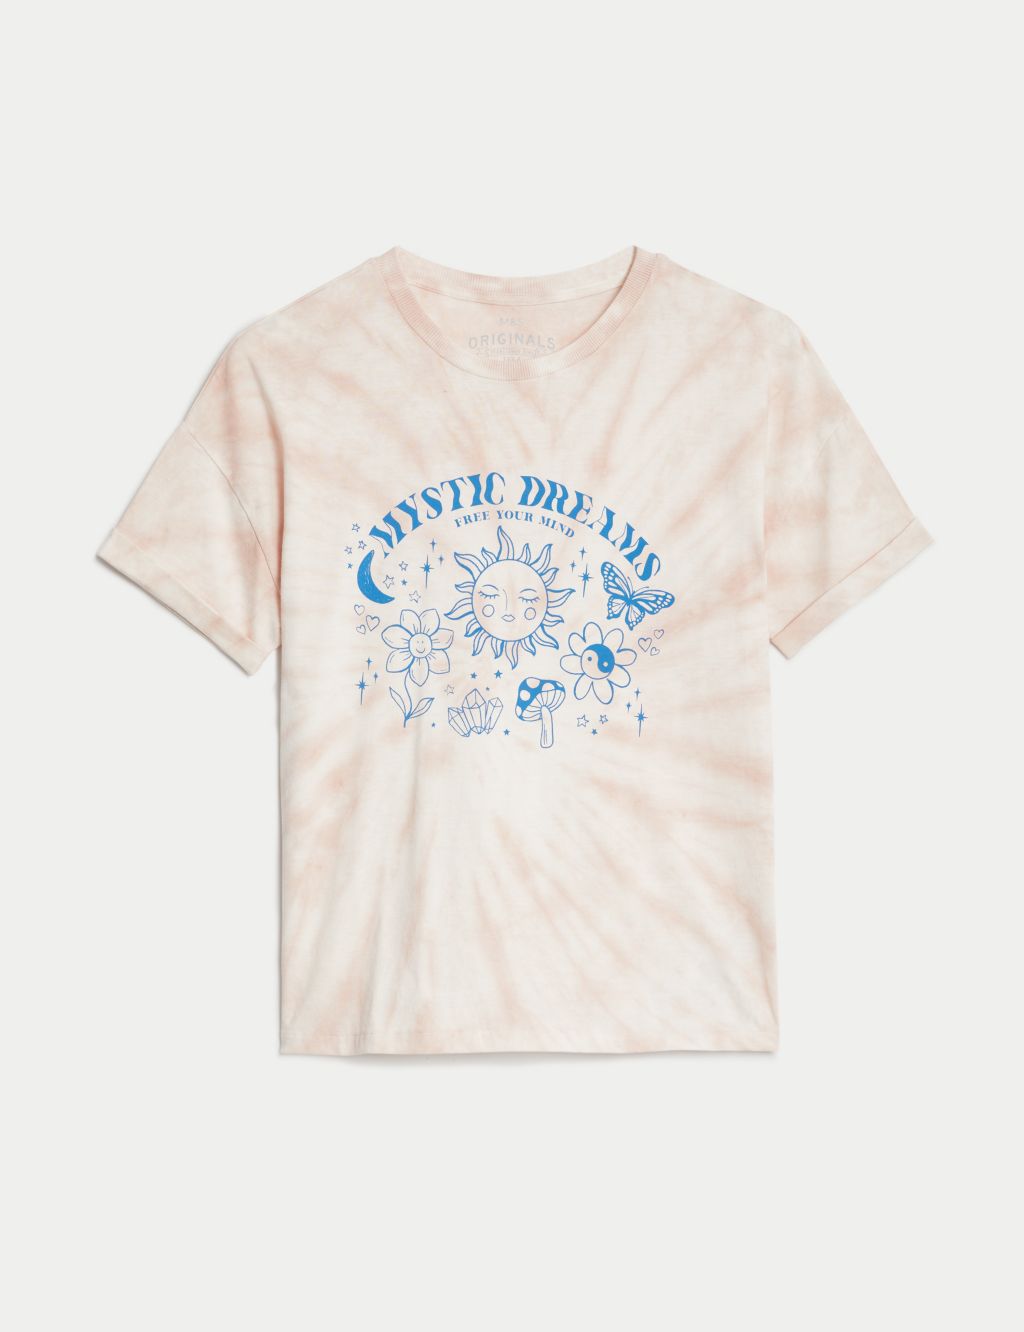 Pure Cotton Tie Dye Graphic T-Shirt (6-16 Yrs) image 2